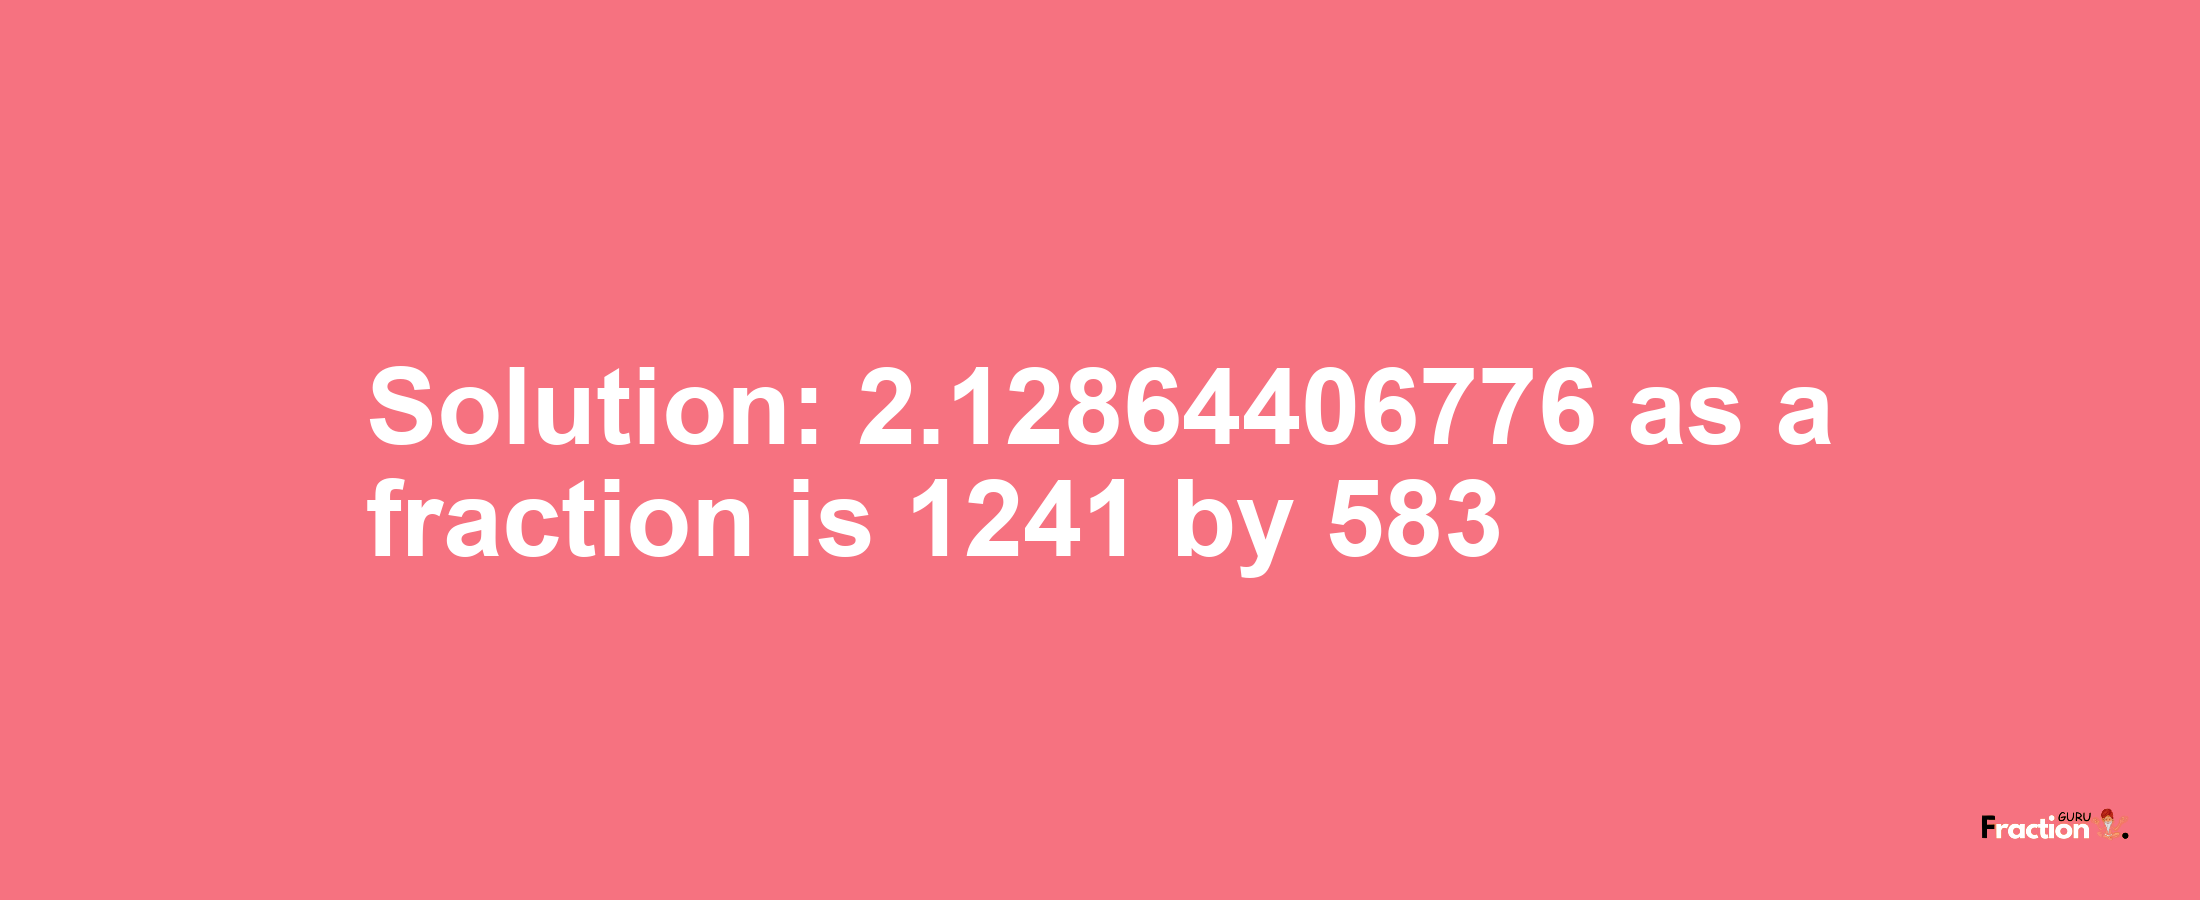 Solution:2.12864406776 as a fraction is 1241/583